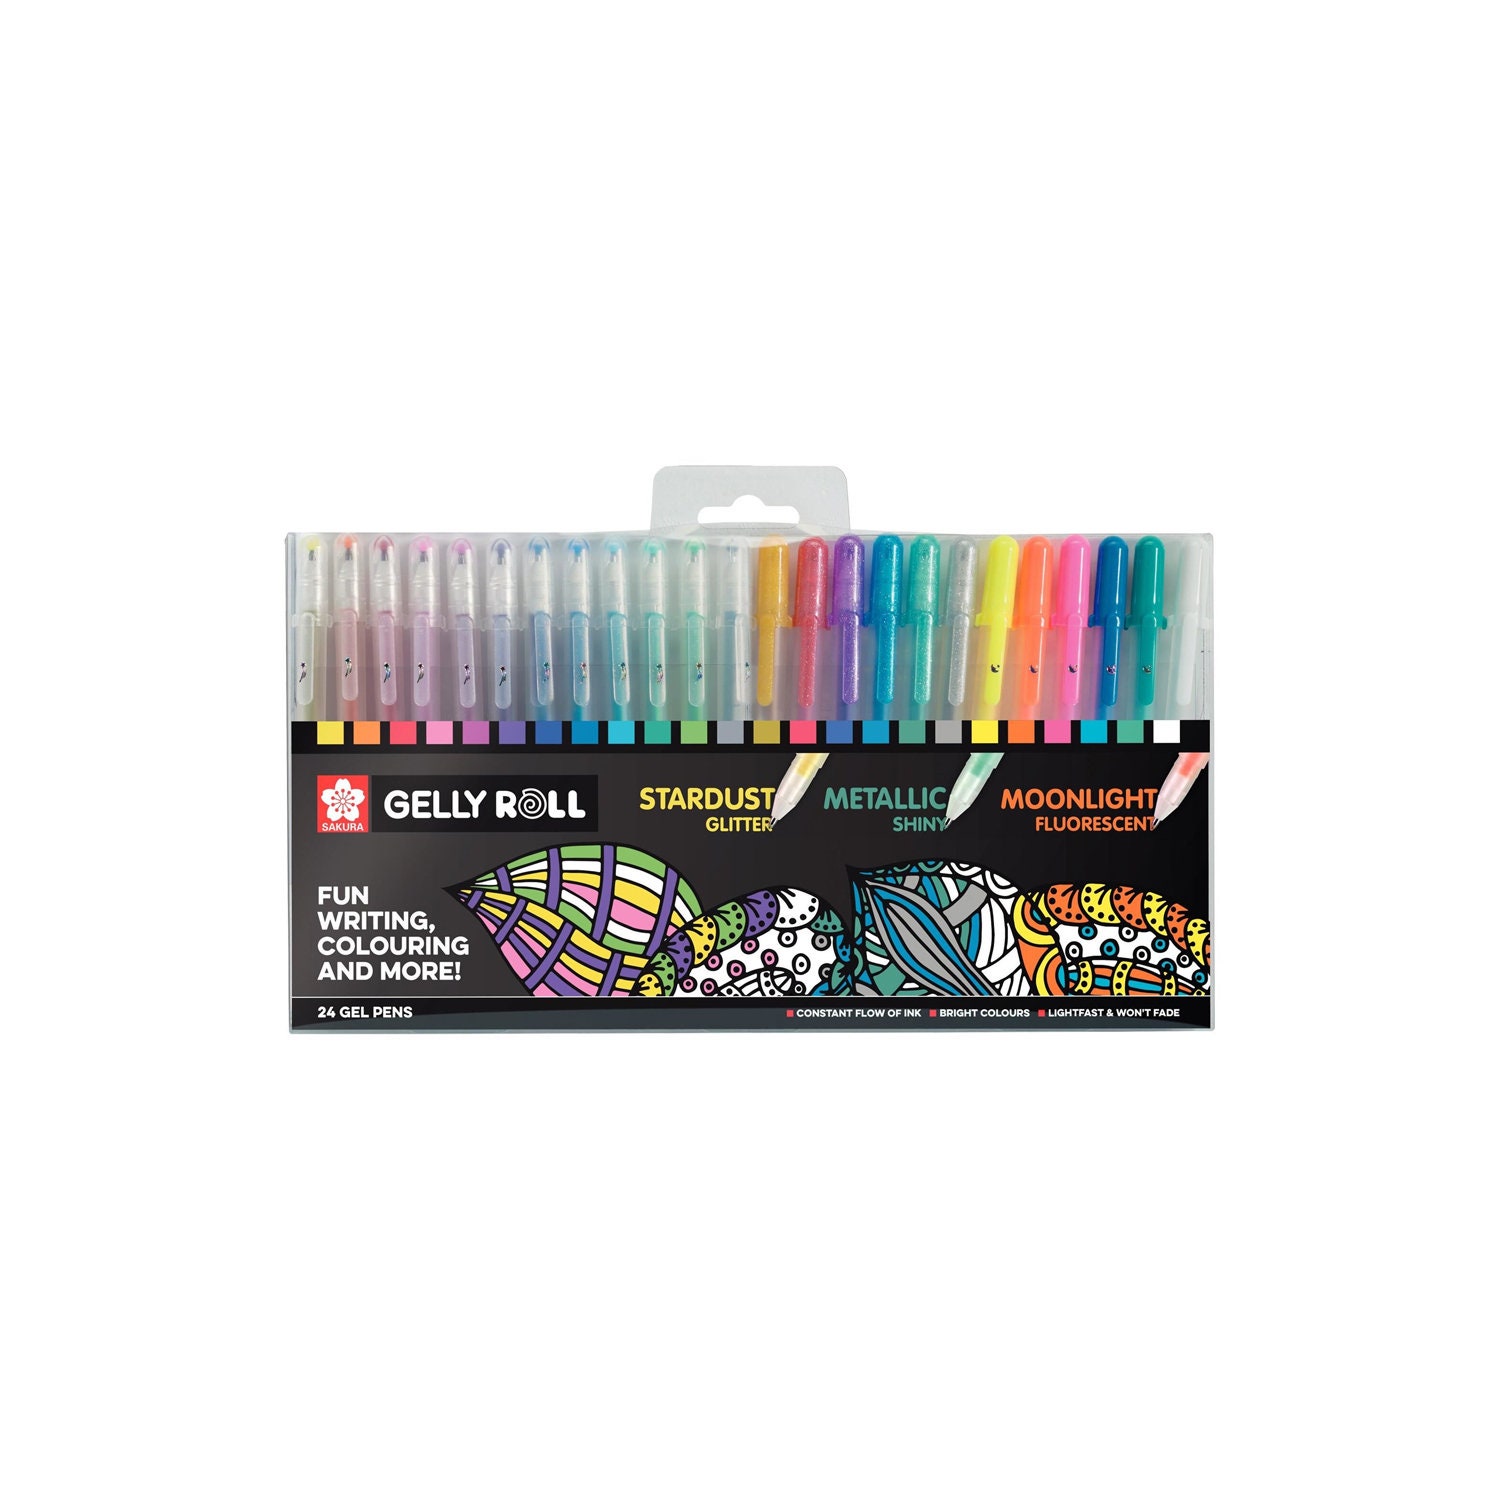 Gelly Roll Classic White 3 Pack – Paper Tree - The Origami Store